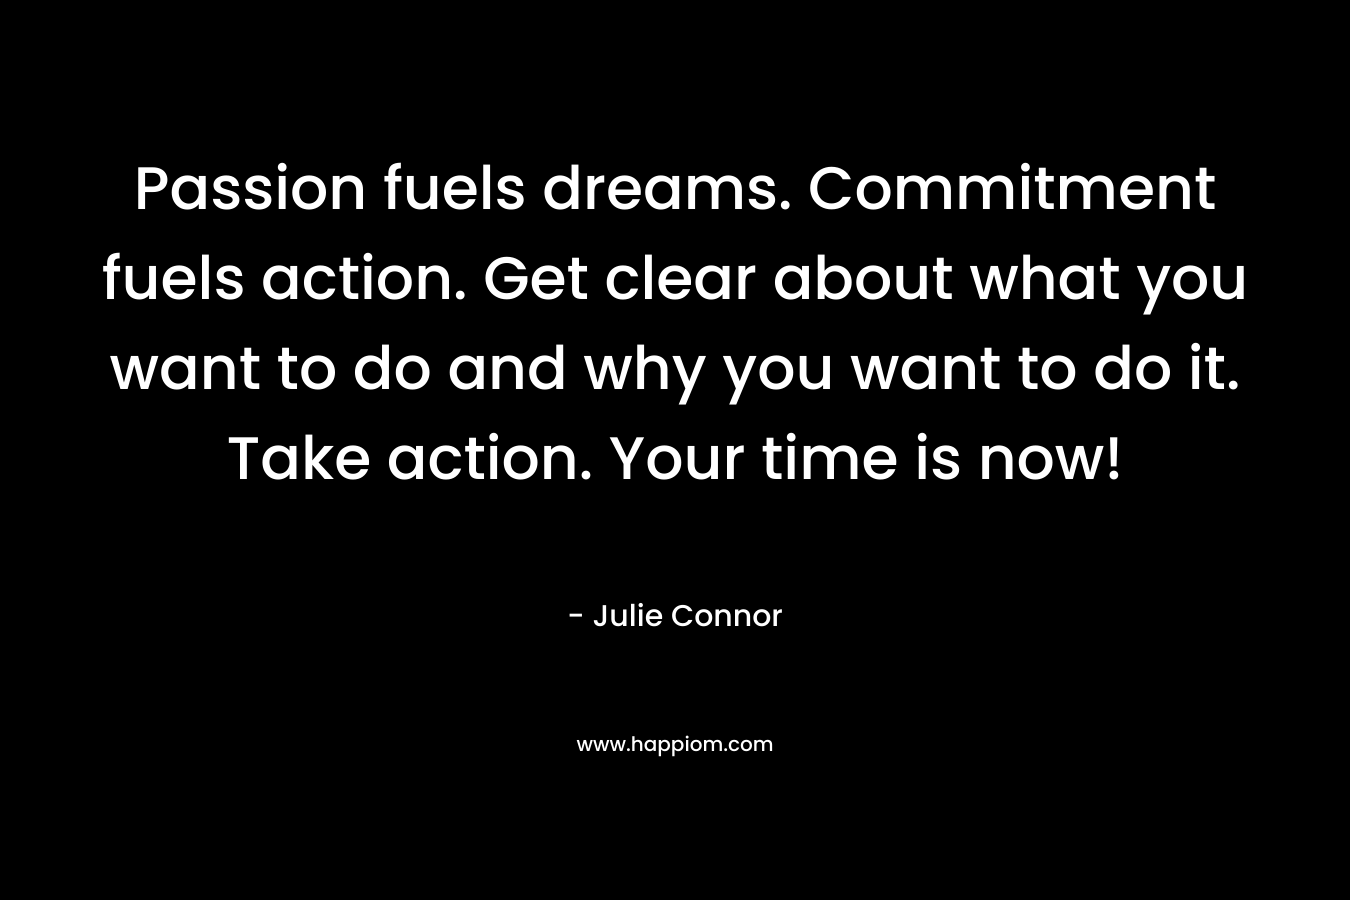 Passion fuels dreams. Commitment fuels action. Get clear about what you want to do and why you want to do it. Take action. Your time is now!